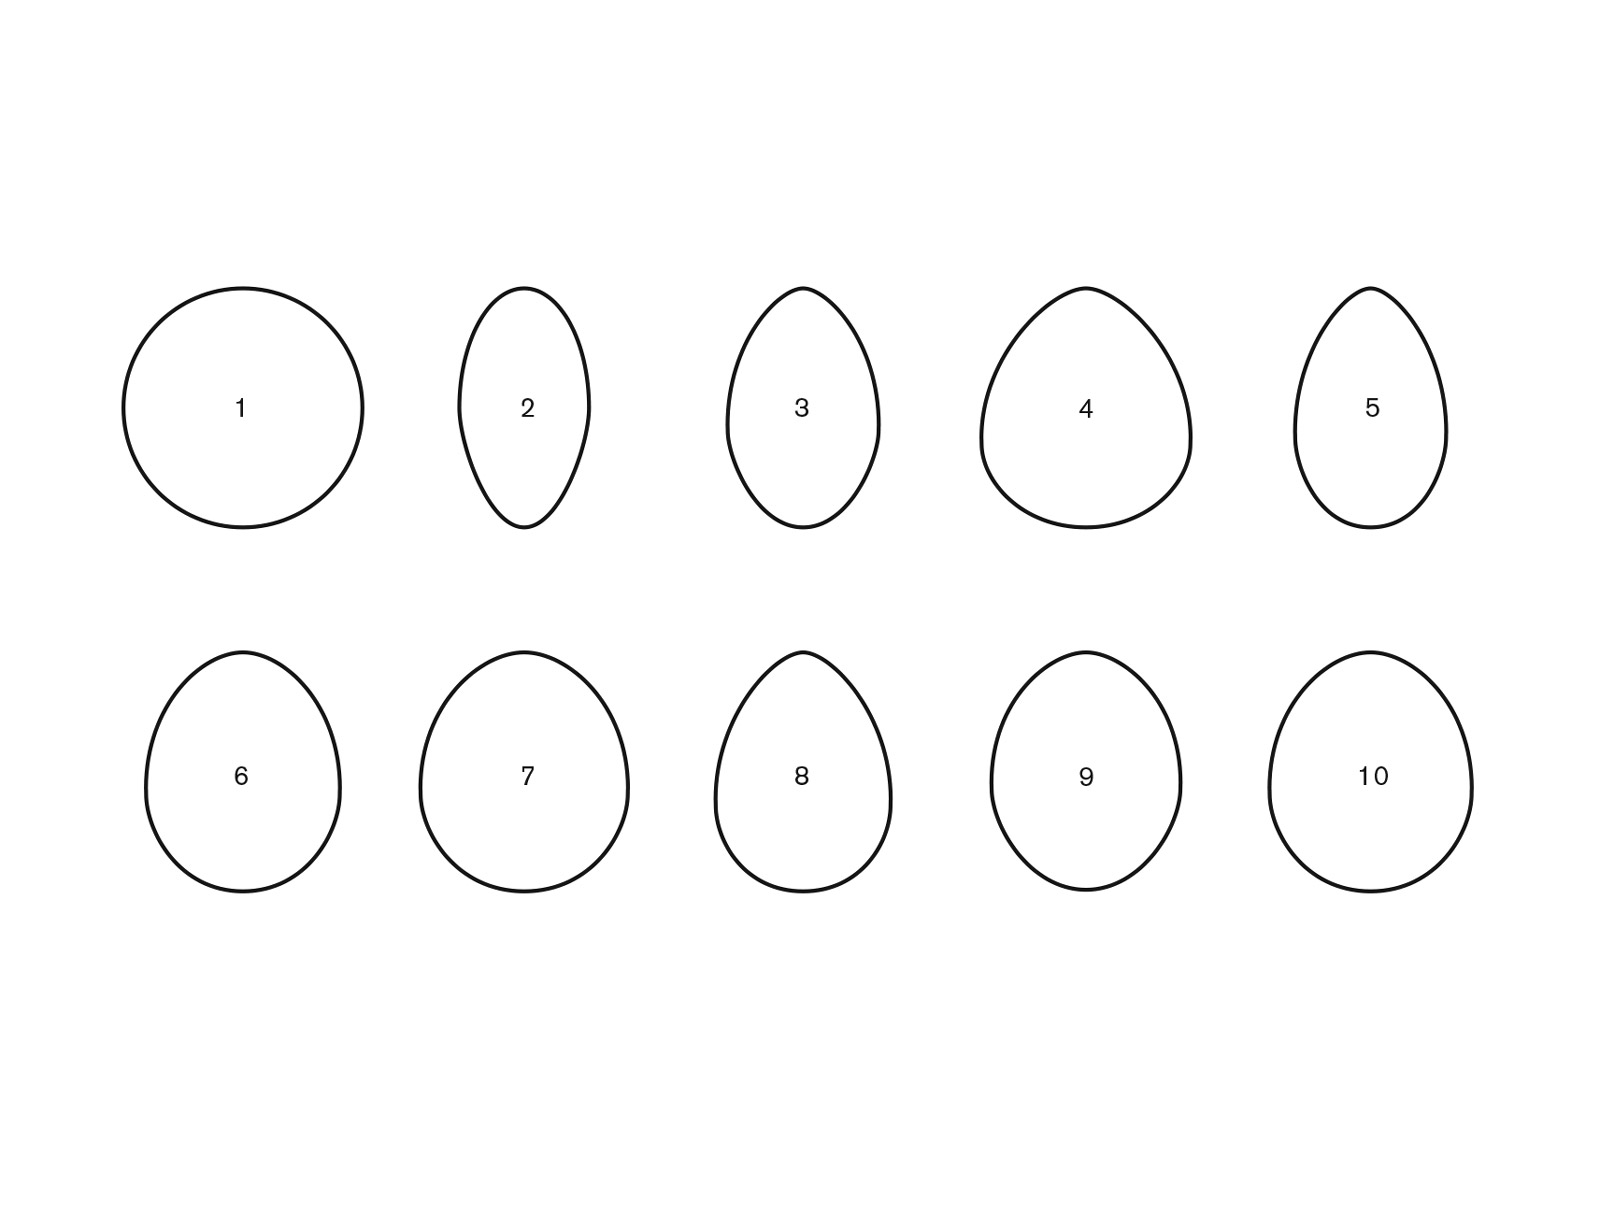 The front of a postcard, featuring ten variated illustrations of egg shapes.